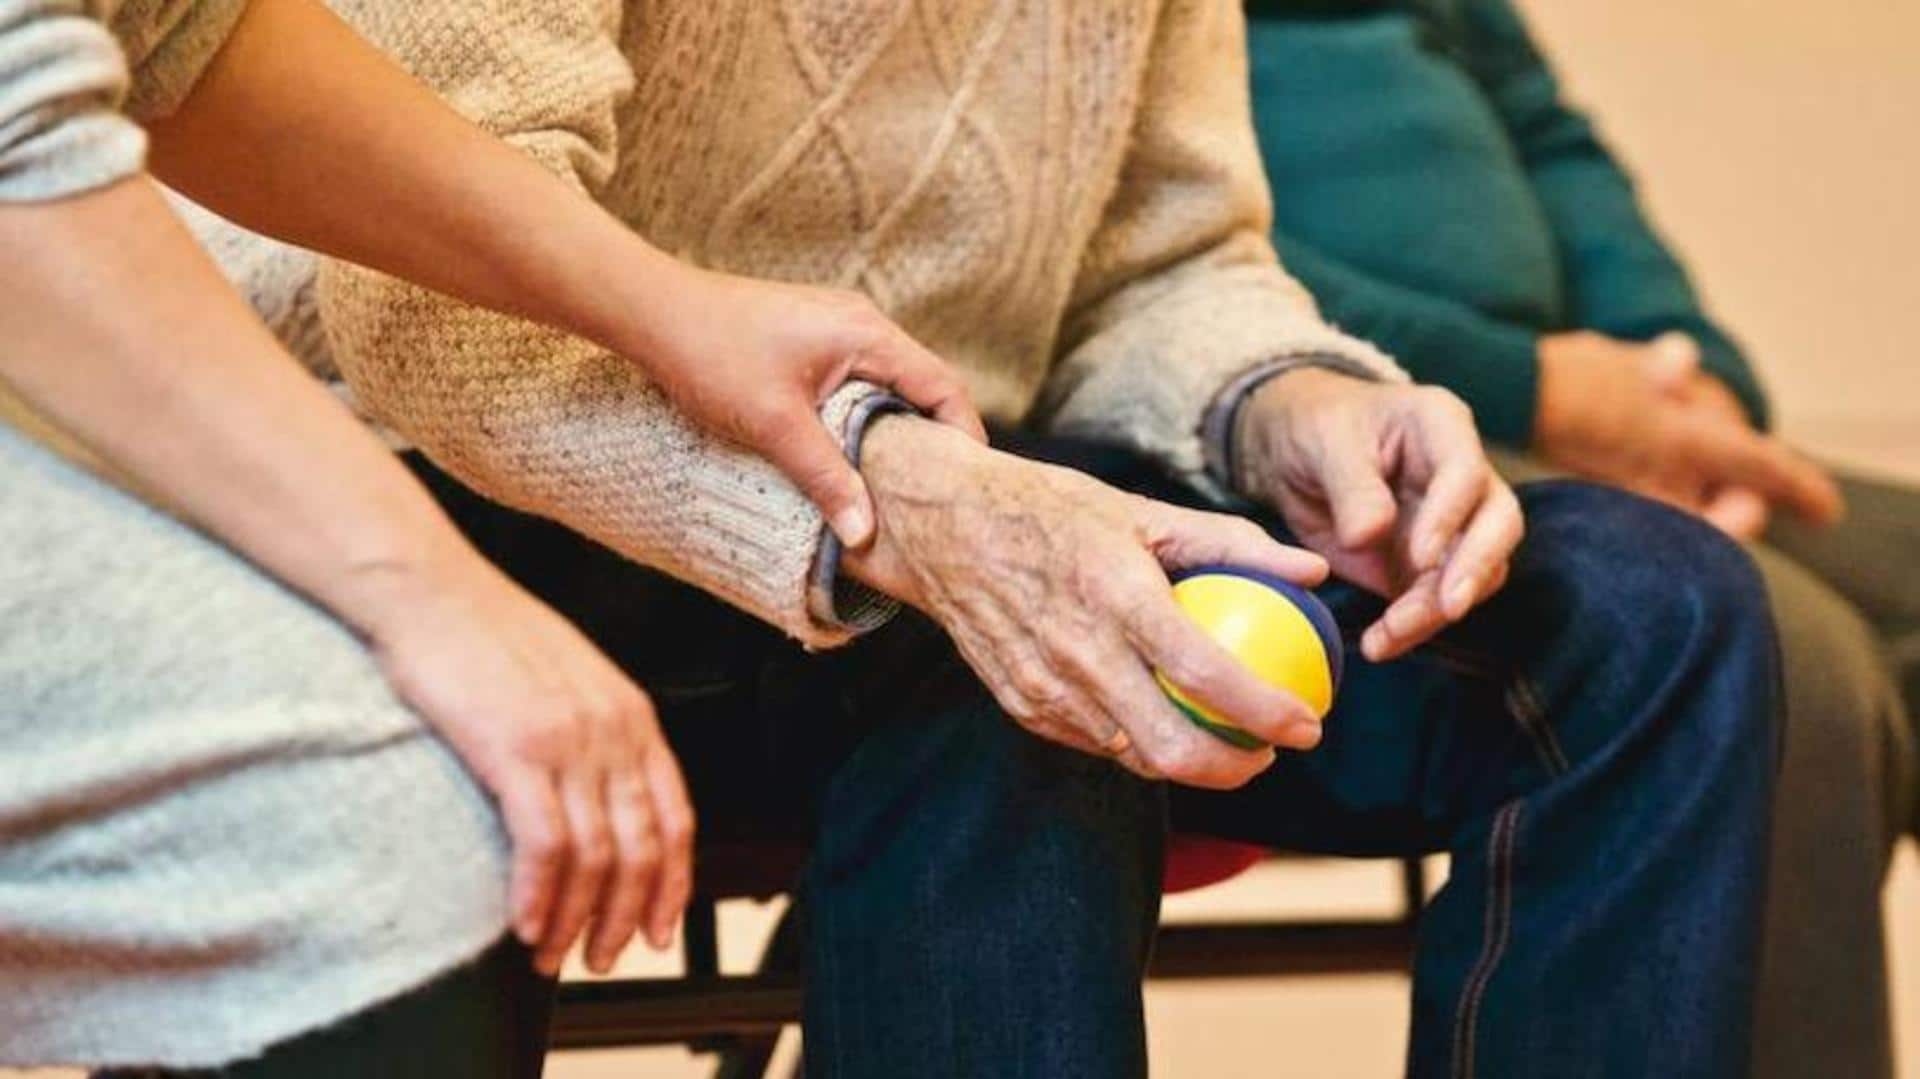 Here's how you can take care of elders at home